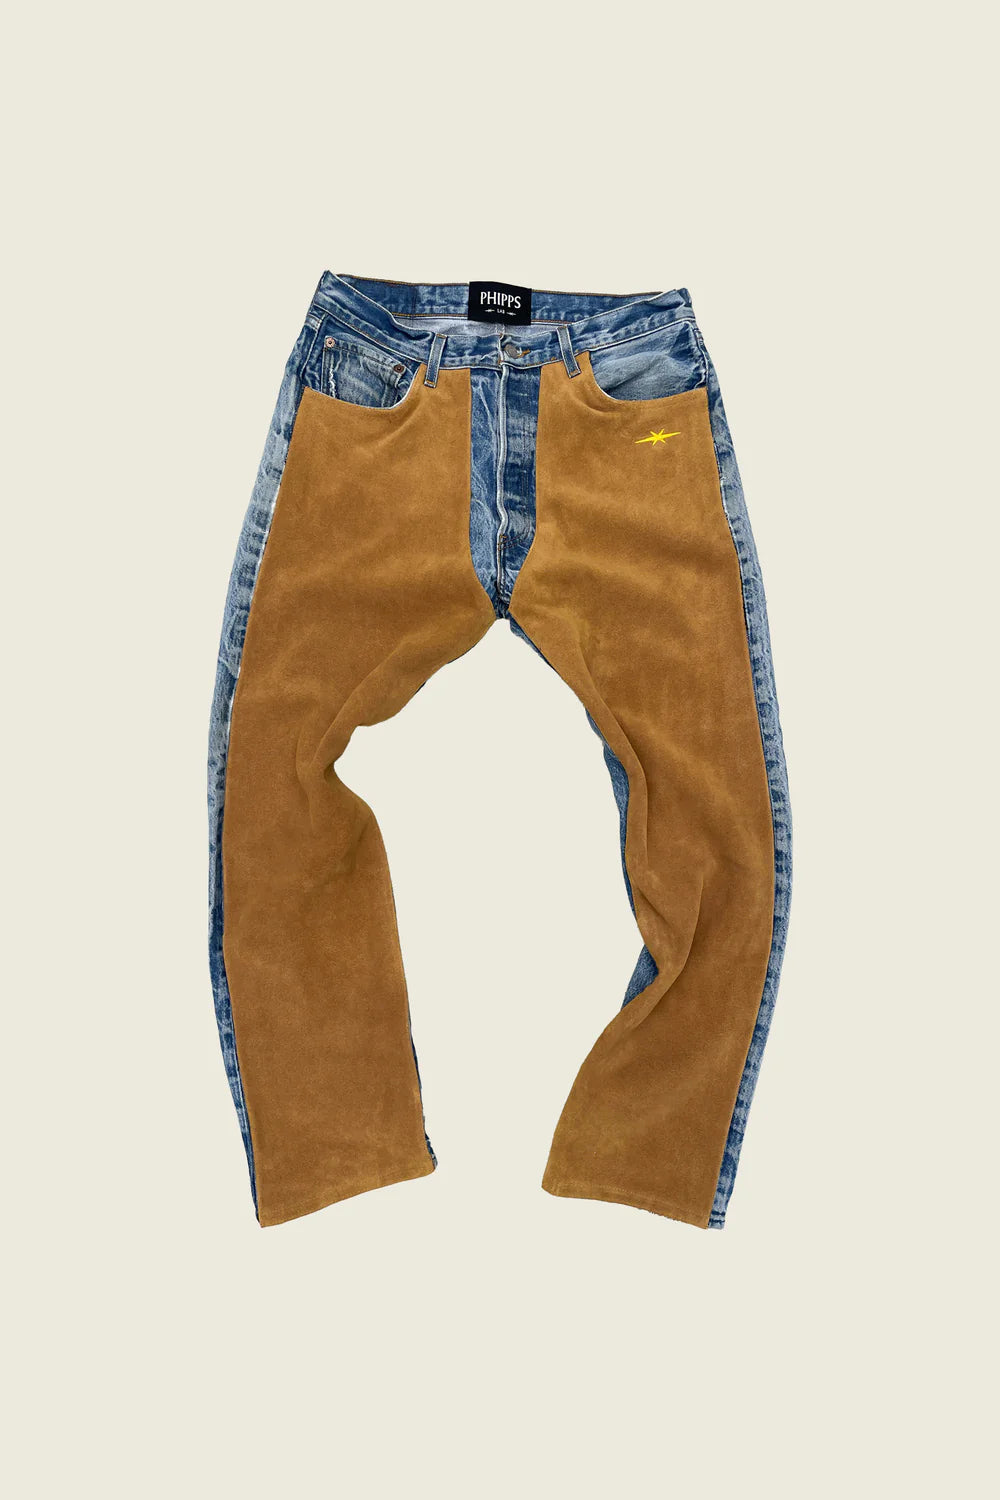 PHIPPS CHAP JEANS TAN SUEDE ON BLUE 0004 -34-